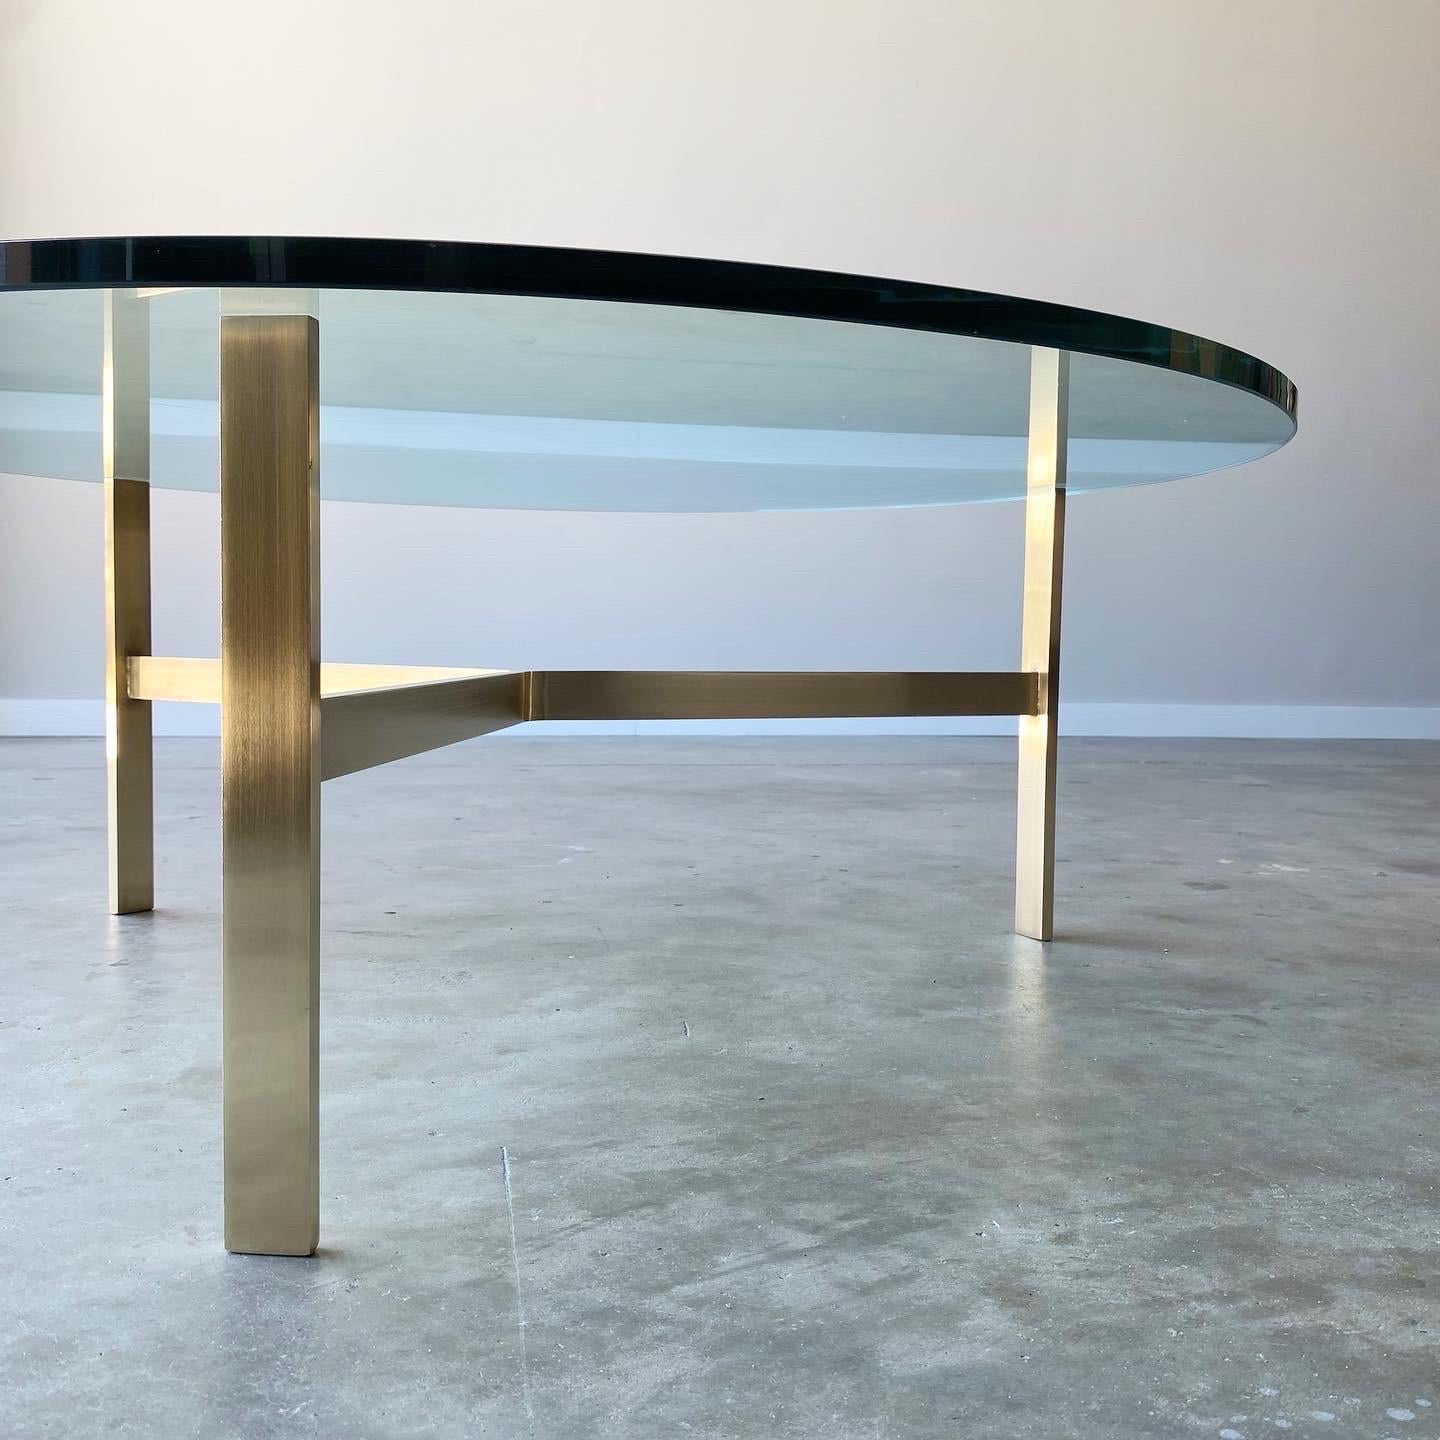 Minimal yet striking. A simple solid brass base, very well executed. Thick glass top, age appropriate wear throughout.

36” diameter, 16 1/2” high